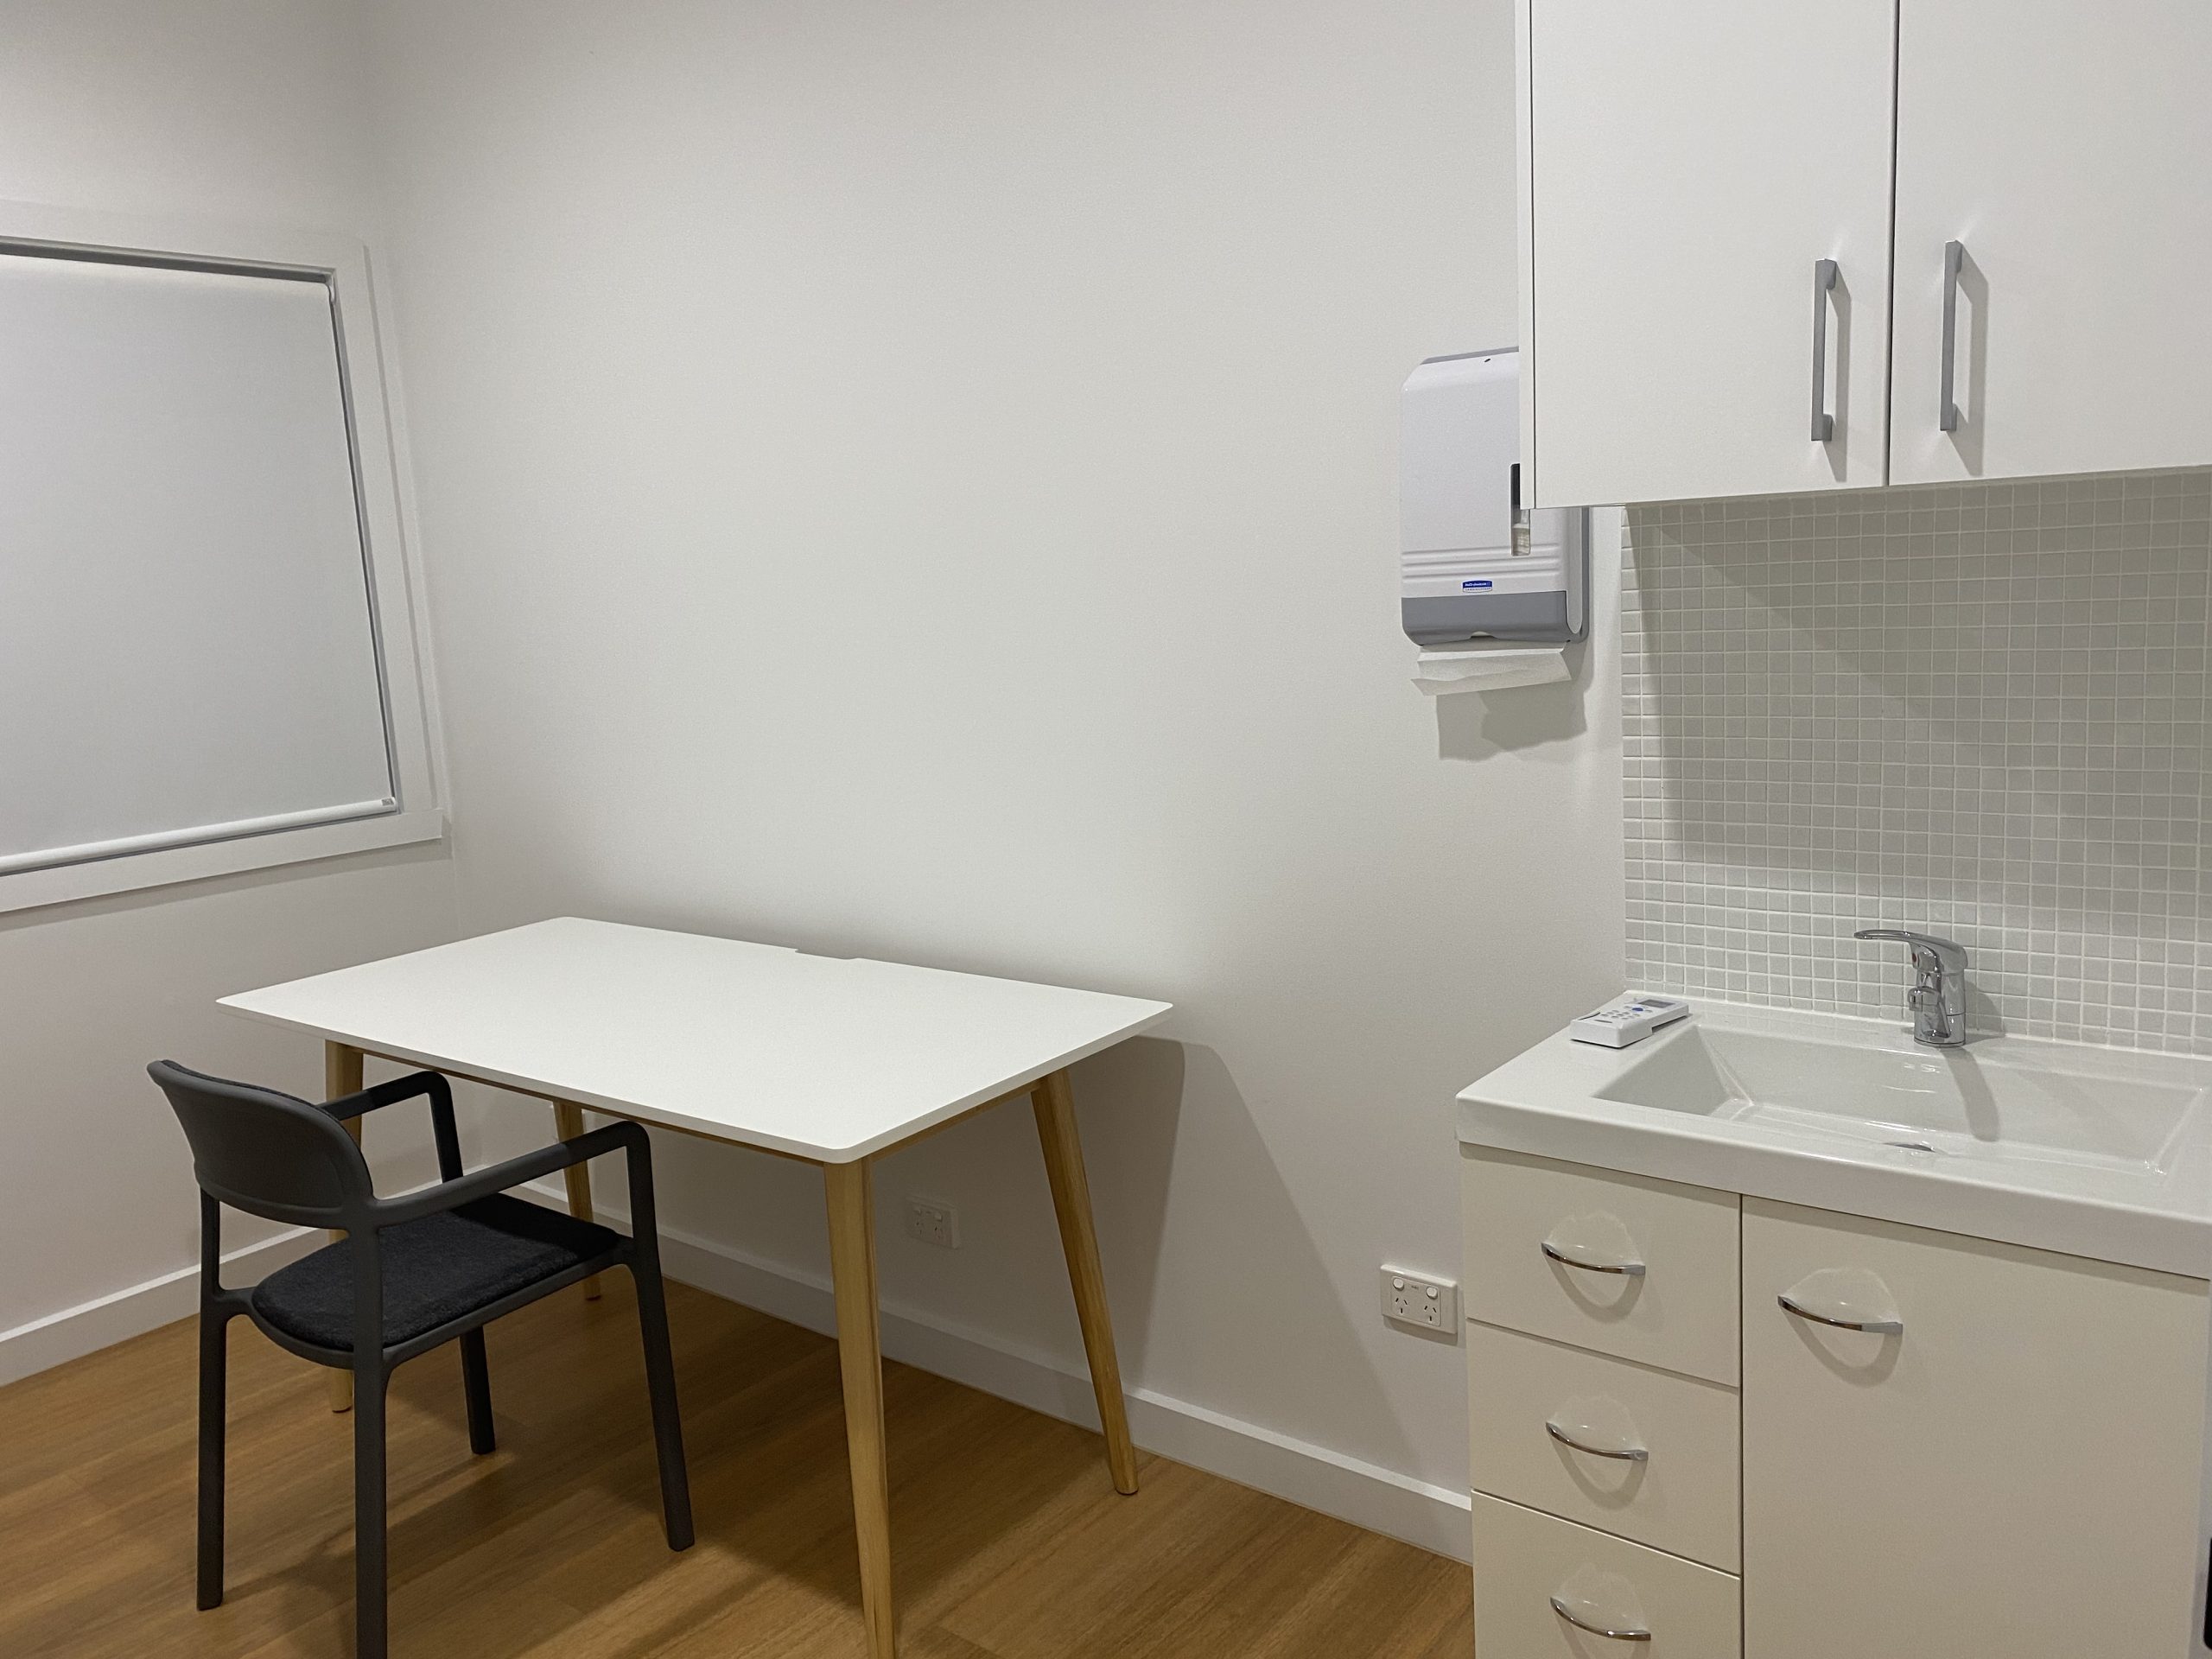 Room for Rent in established specialty Frankston Medical Clinic – would suit Allied Practitioner